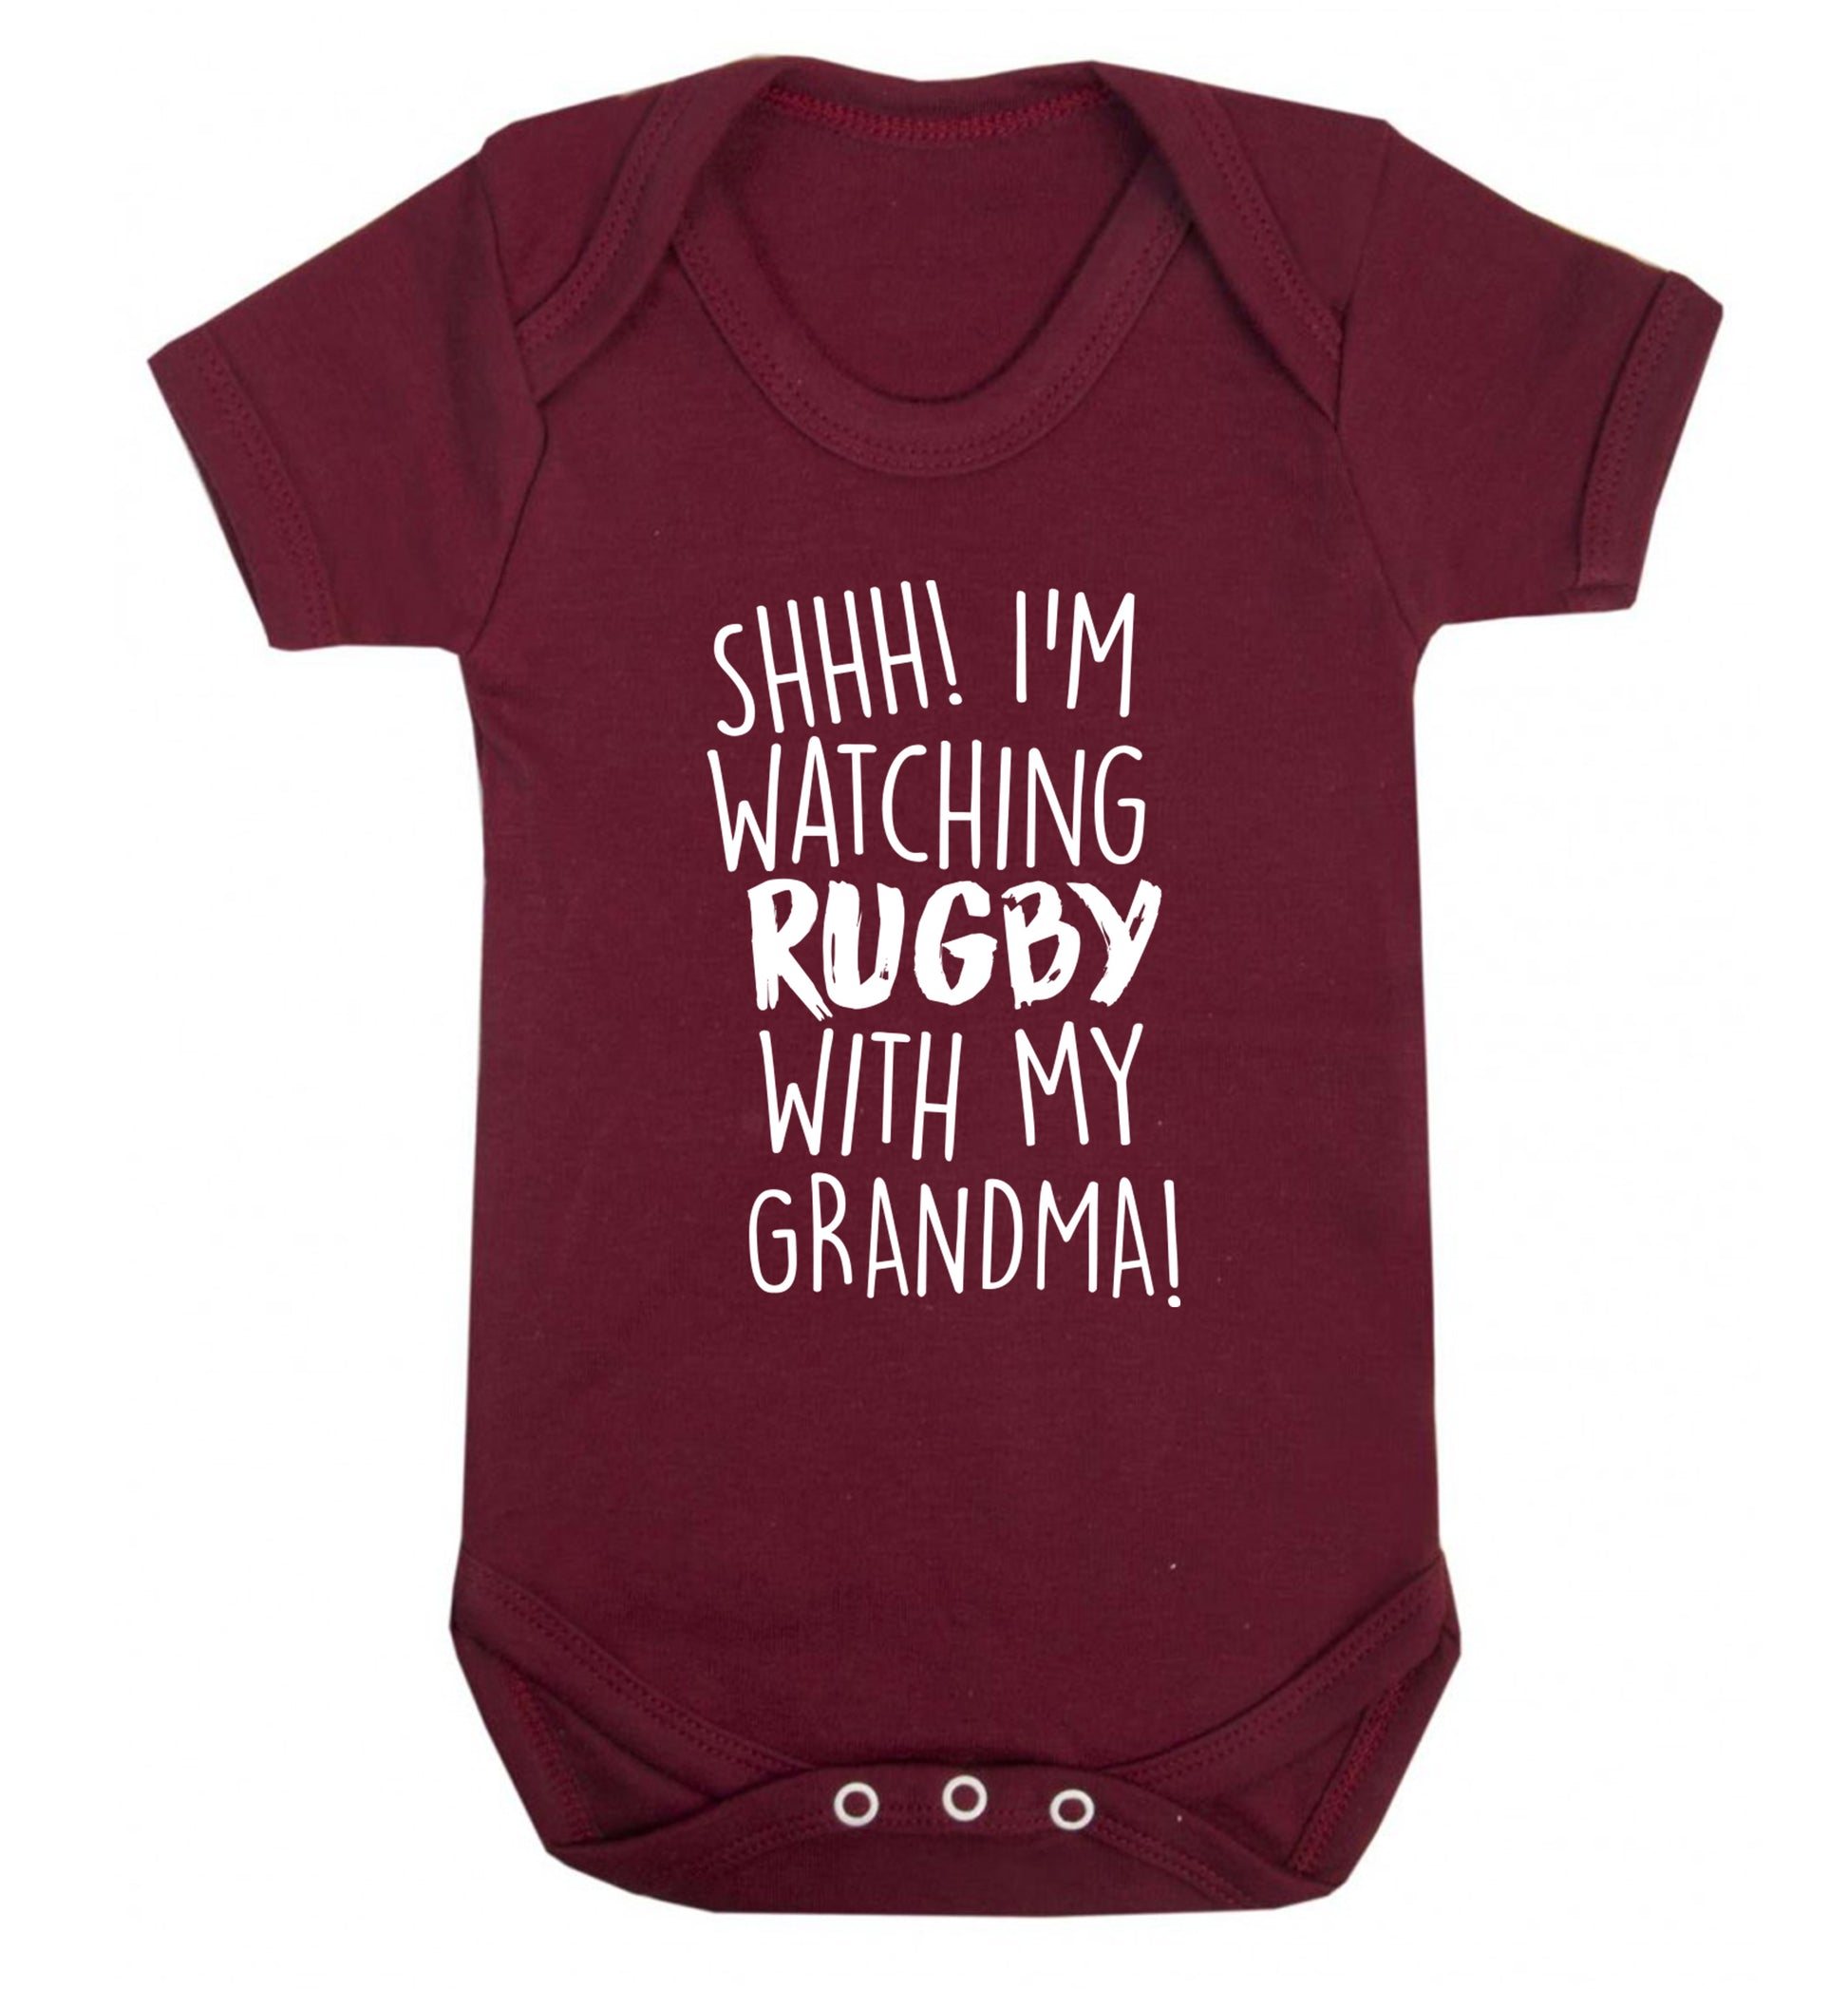 Shh I'm watching rugby with my grandma Baby Vest maroon 18-24 months